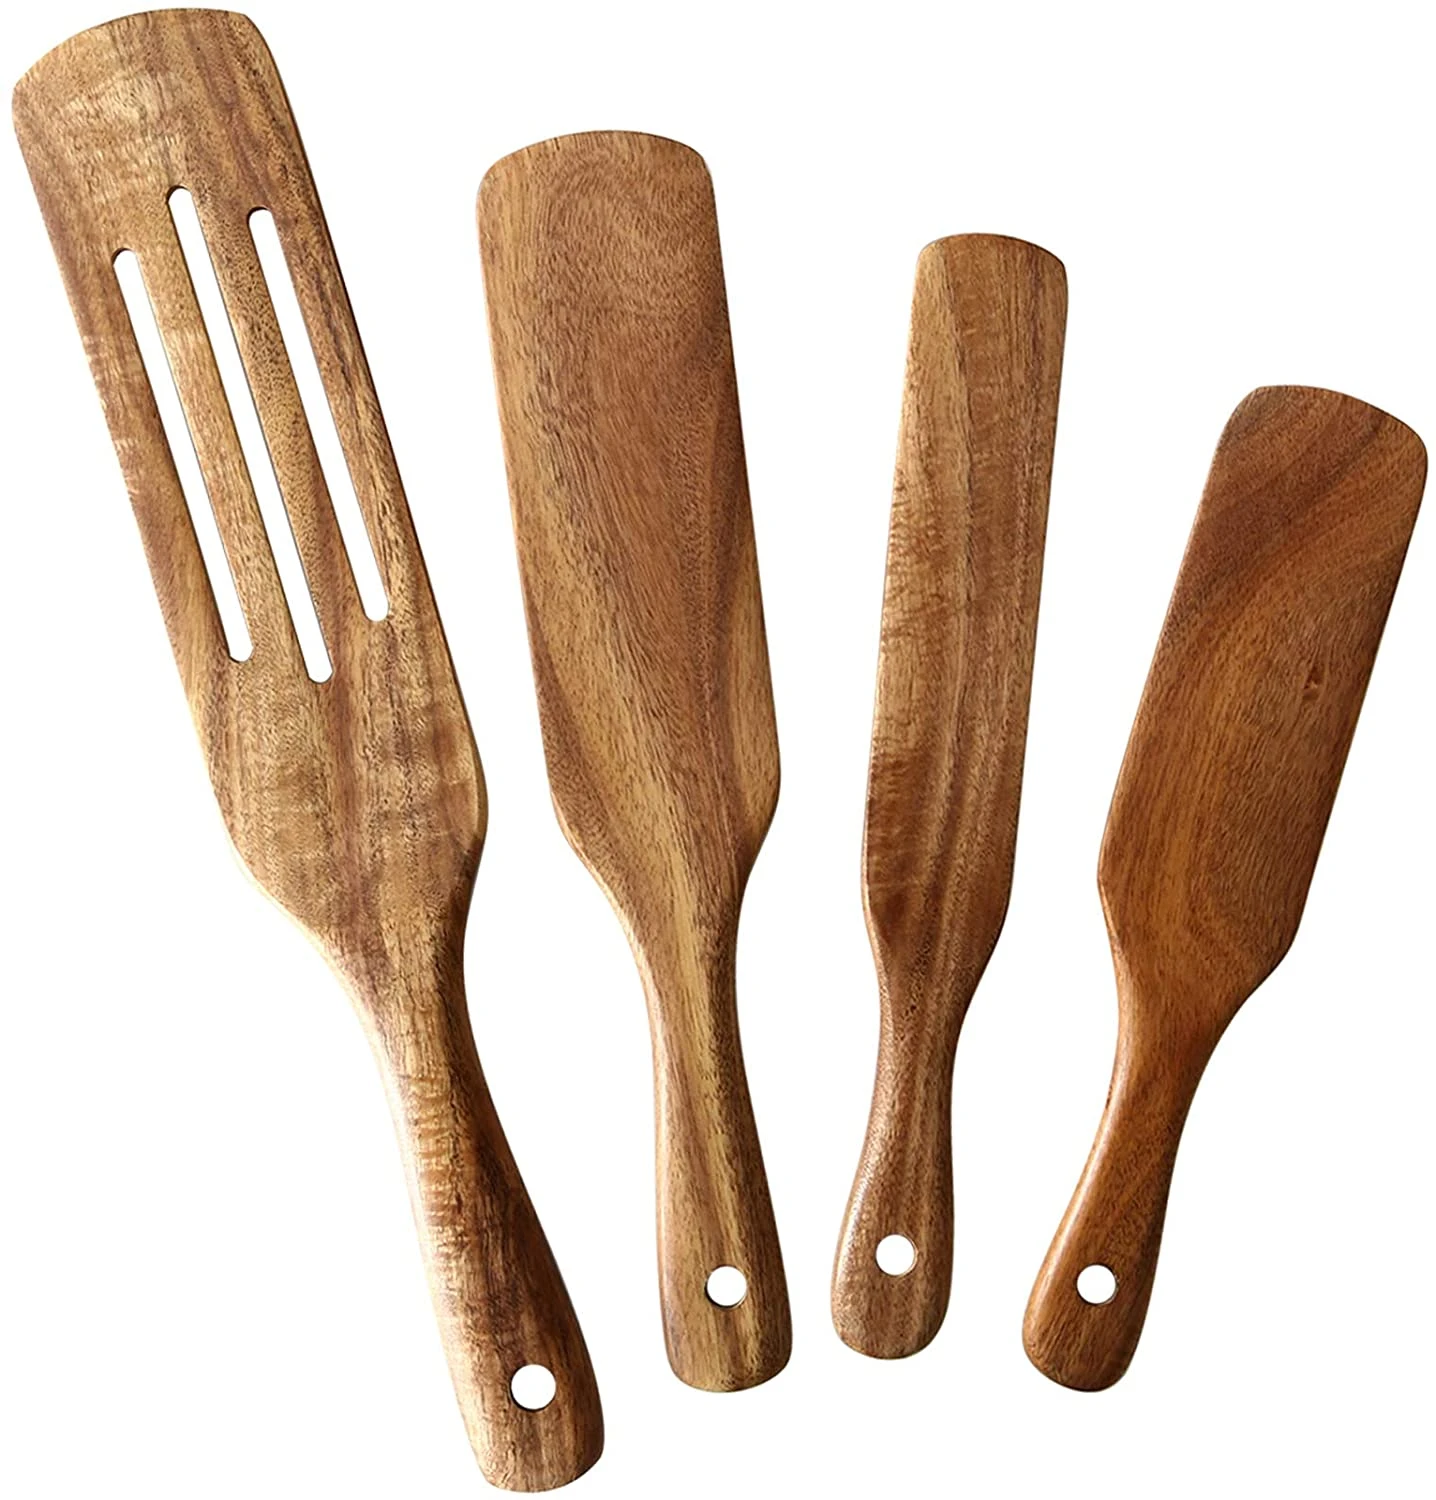 Wooden Spurtles Set of 4 Non-Stick Utensils Tools Durable Natural Acacia Slotted Stirring Spatula Kitchen Cookware